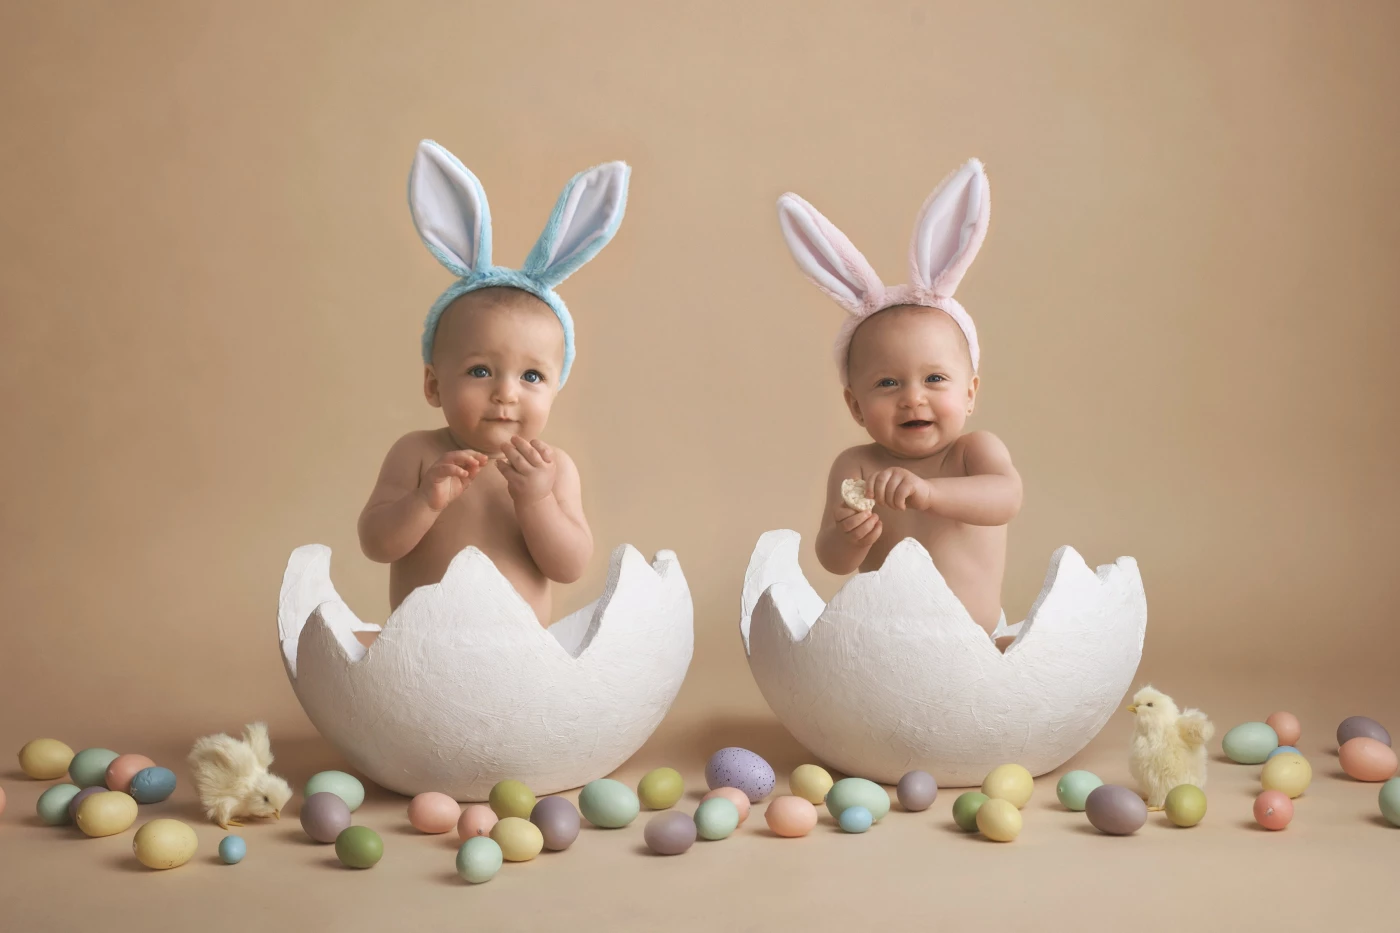 These little sweethearts came back for some updated images around Easter so I couldn't resist creating a little themed shot for them. This shot really captures their very different personalities. How adorable are they!!?